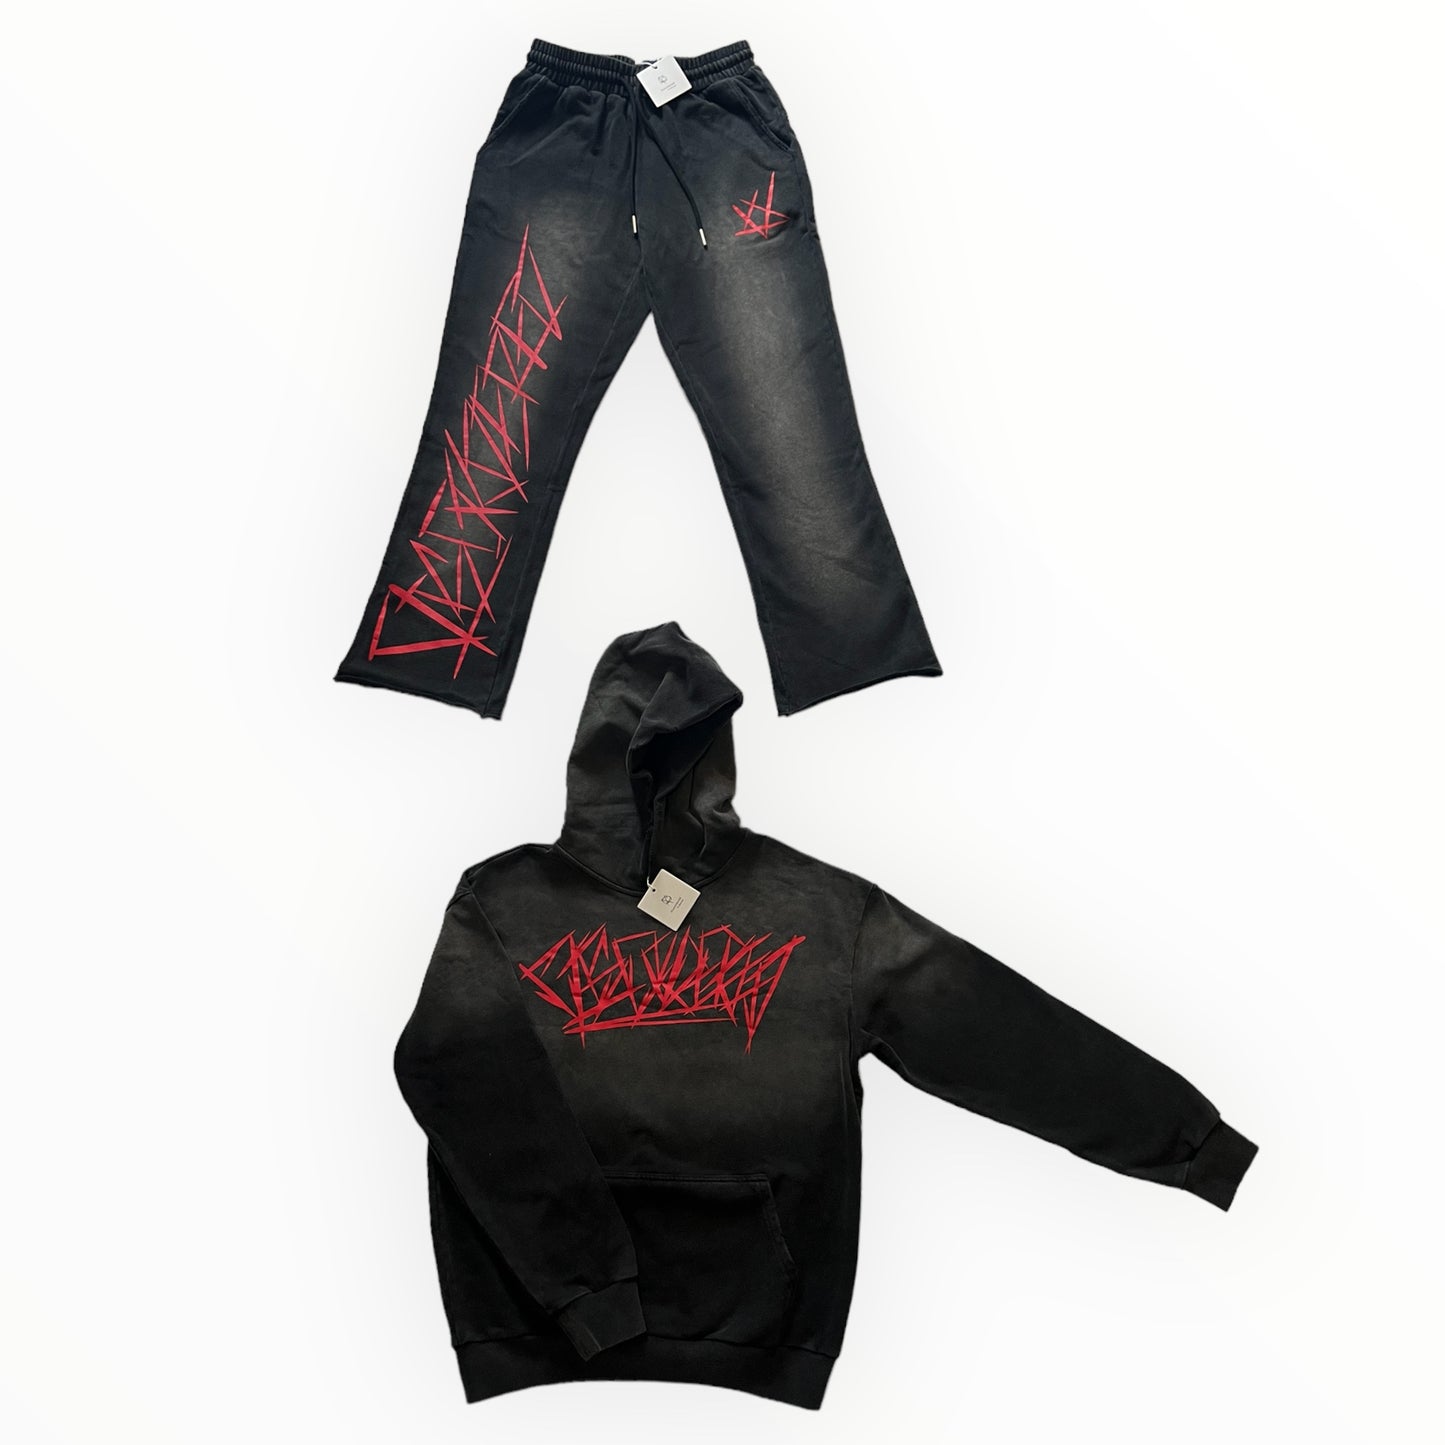 Washed Black and Red streetwear Sweat Suit